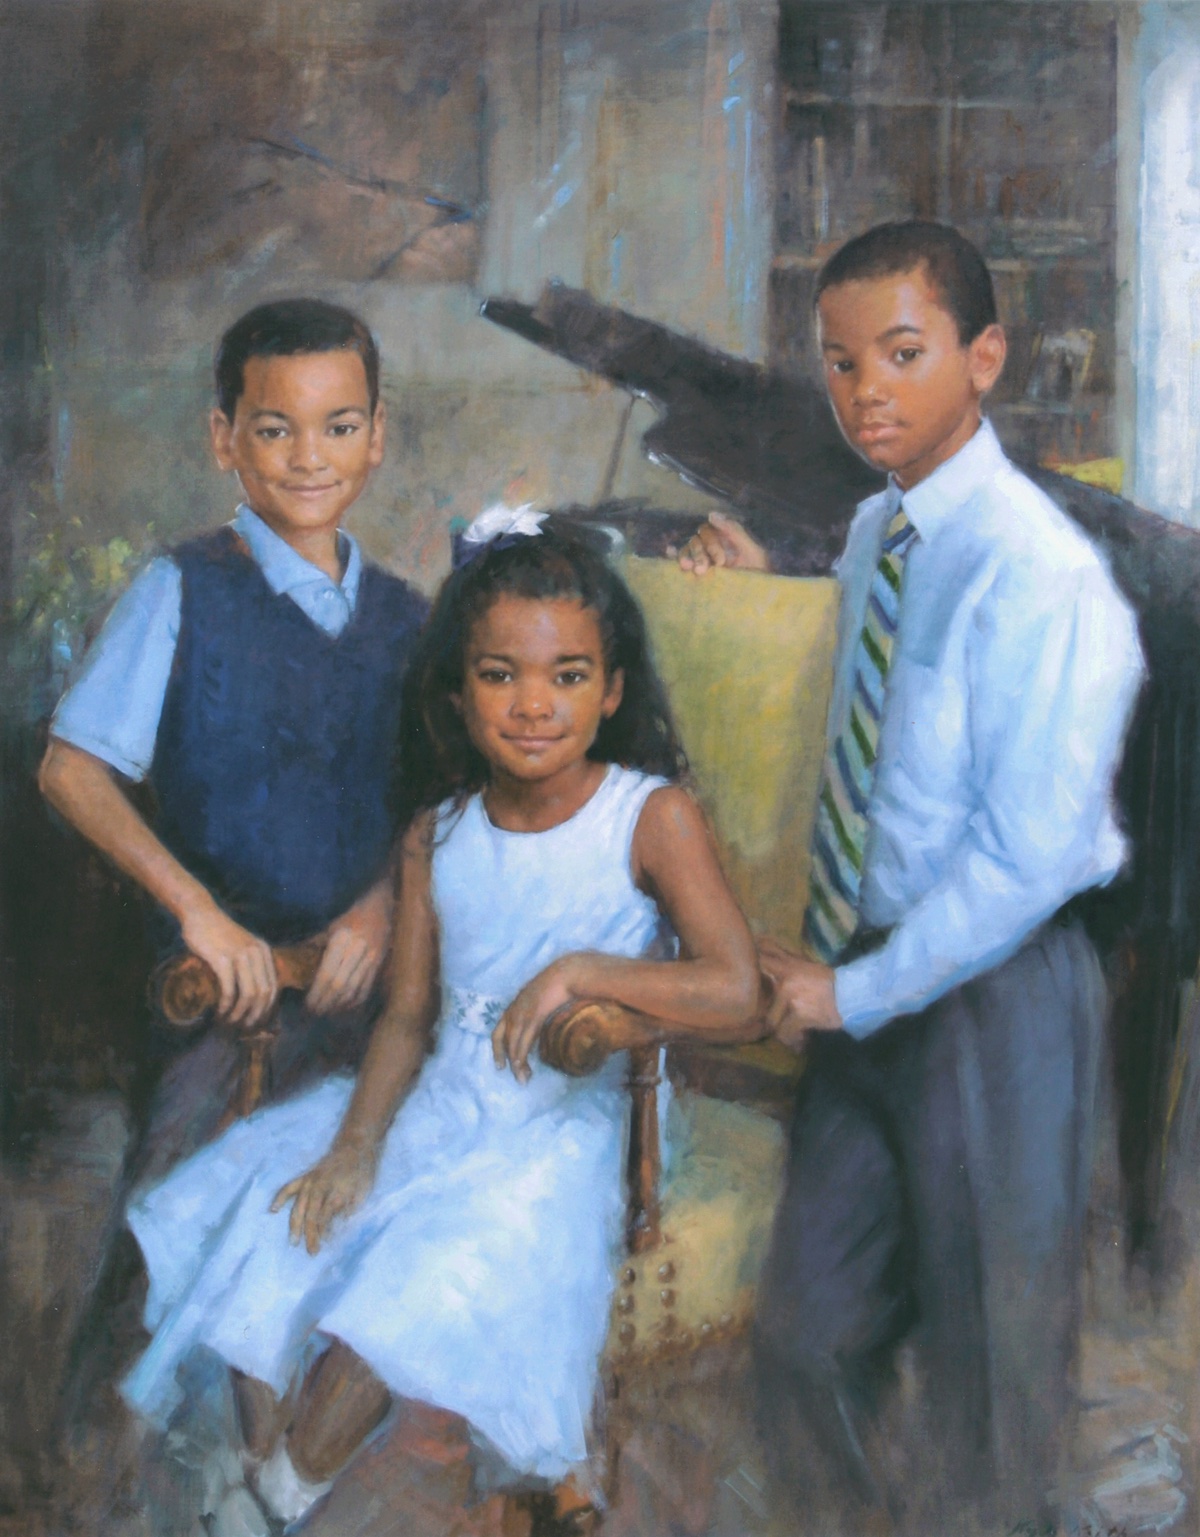 Commissioned fine art portrait of 3 young siblings, 2 brothers and 1 sister, posed in front a grand piano